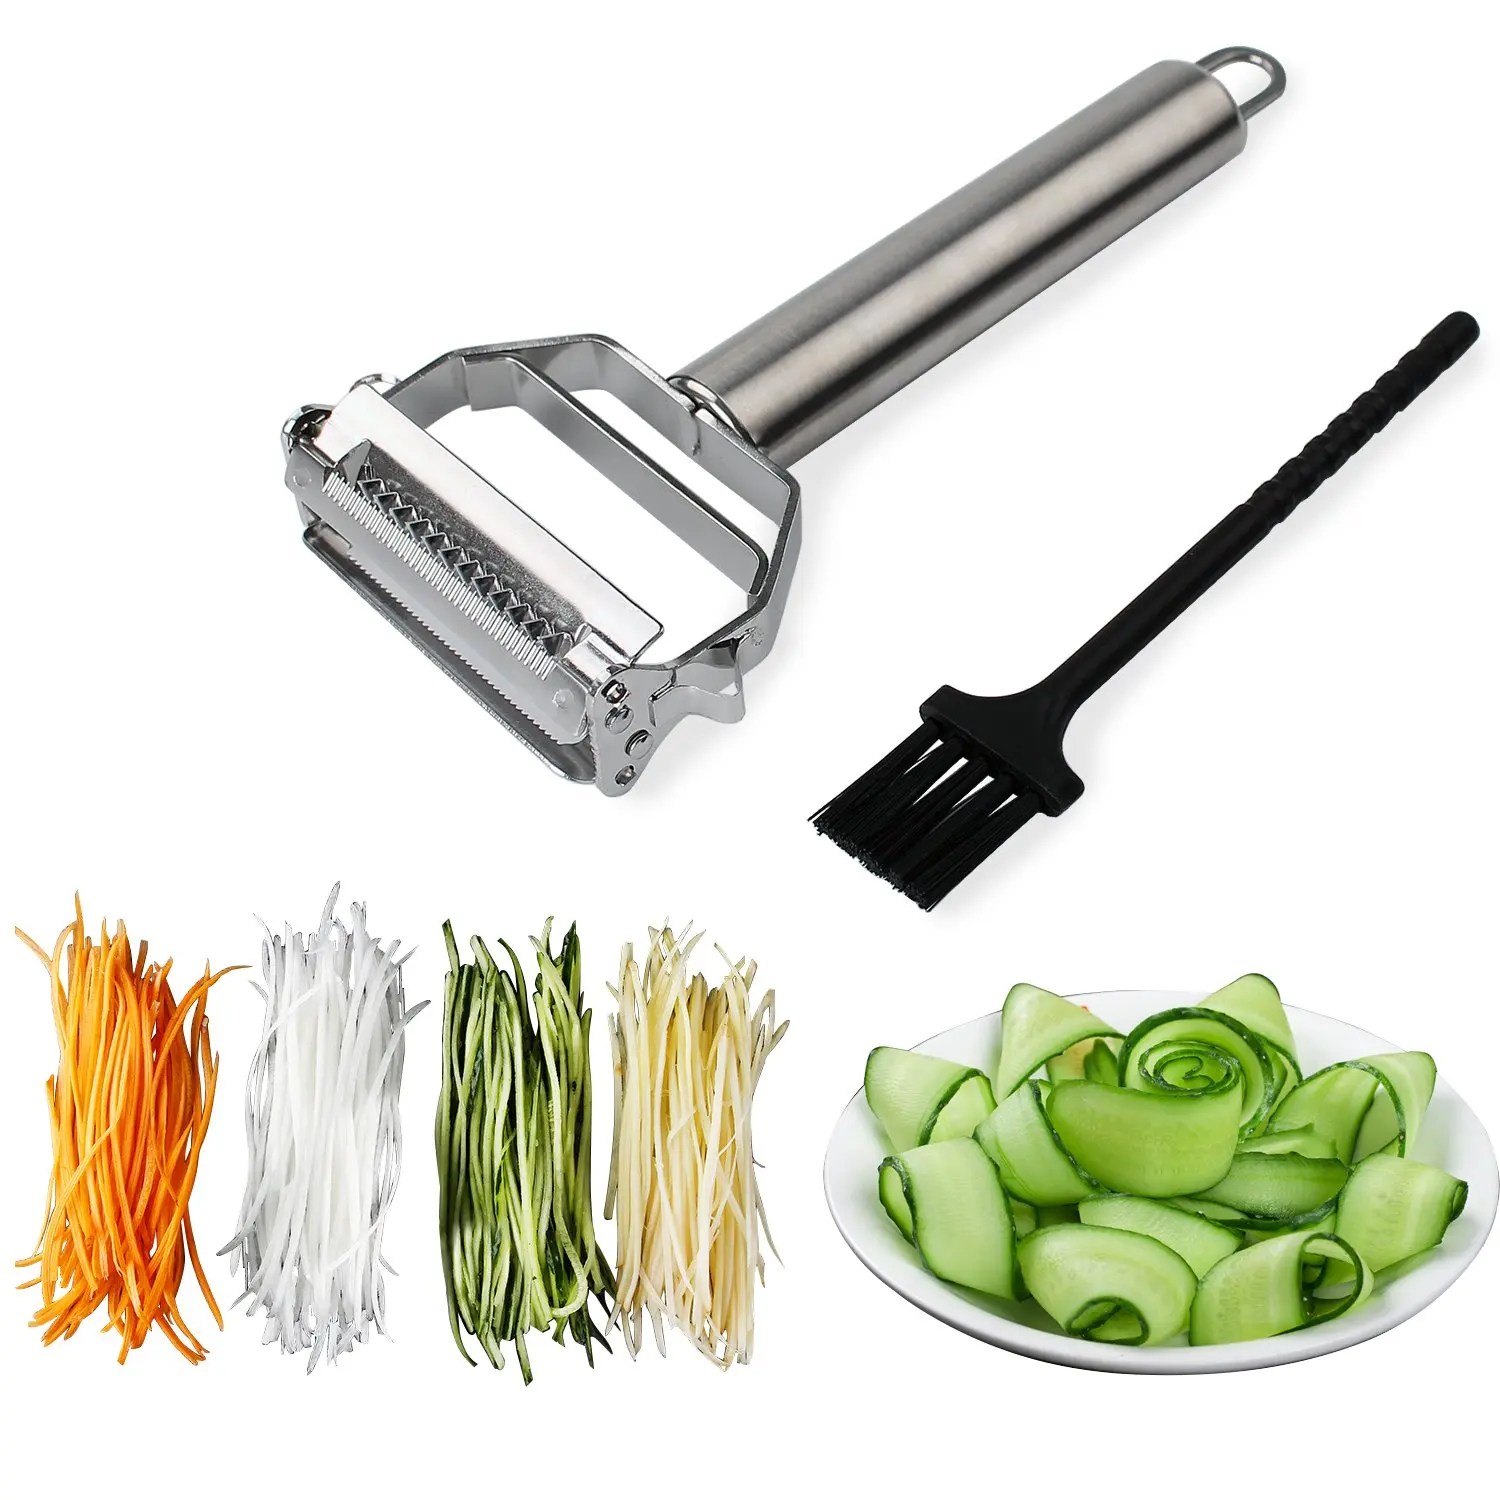 

Julienne Peeler Stainless Steel Cutter Slicer with Cleaning Brush Pro for Carrot Potato Melon Gadget Vegetable Fruit